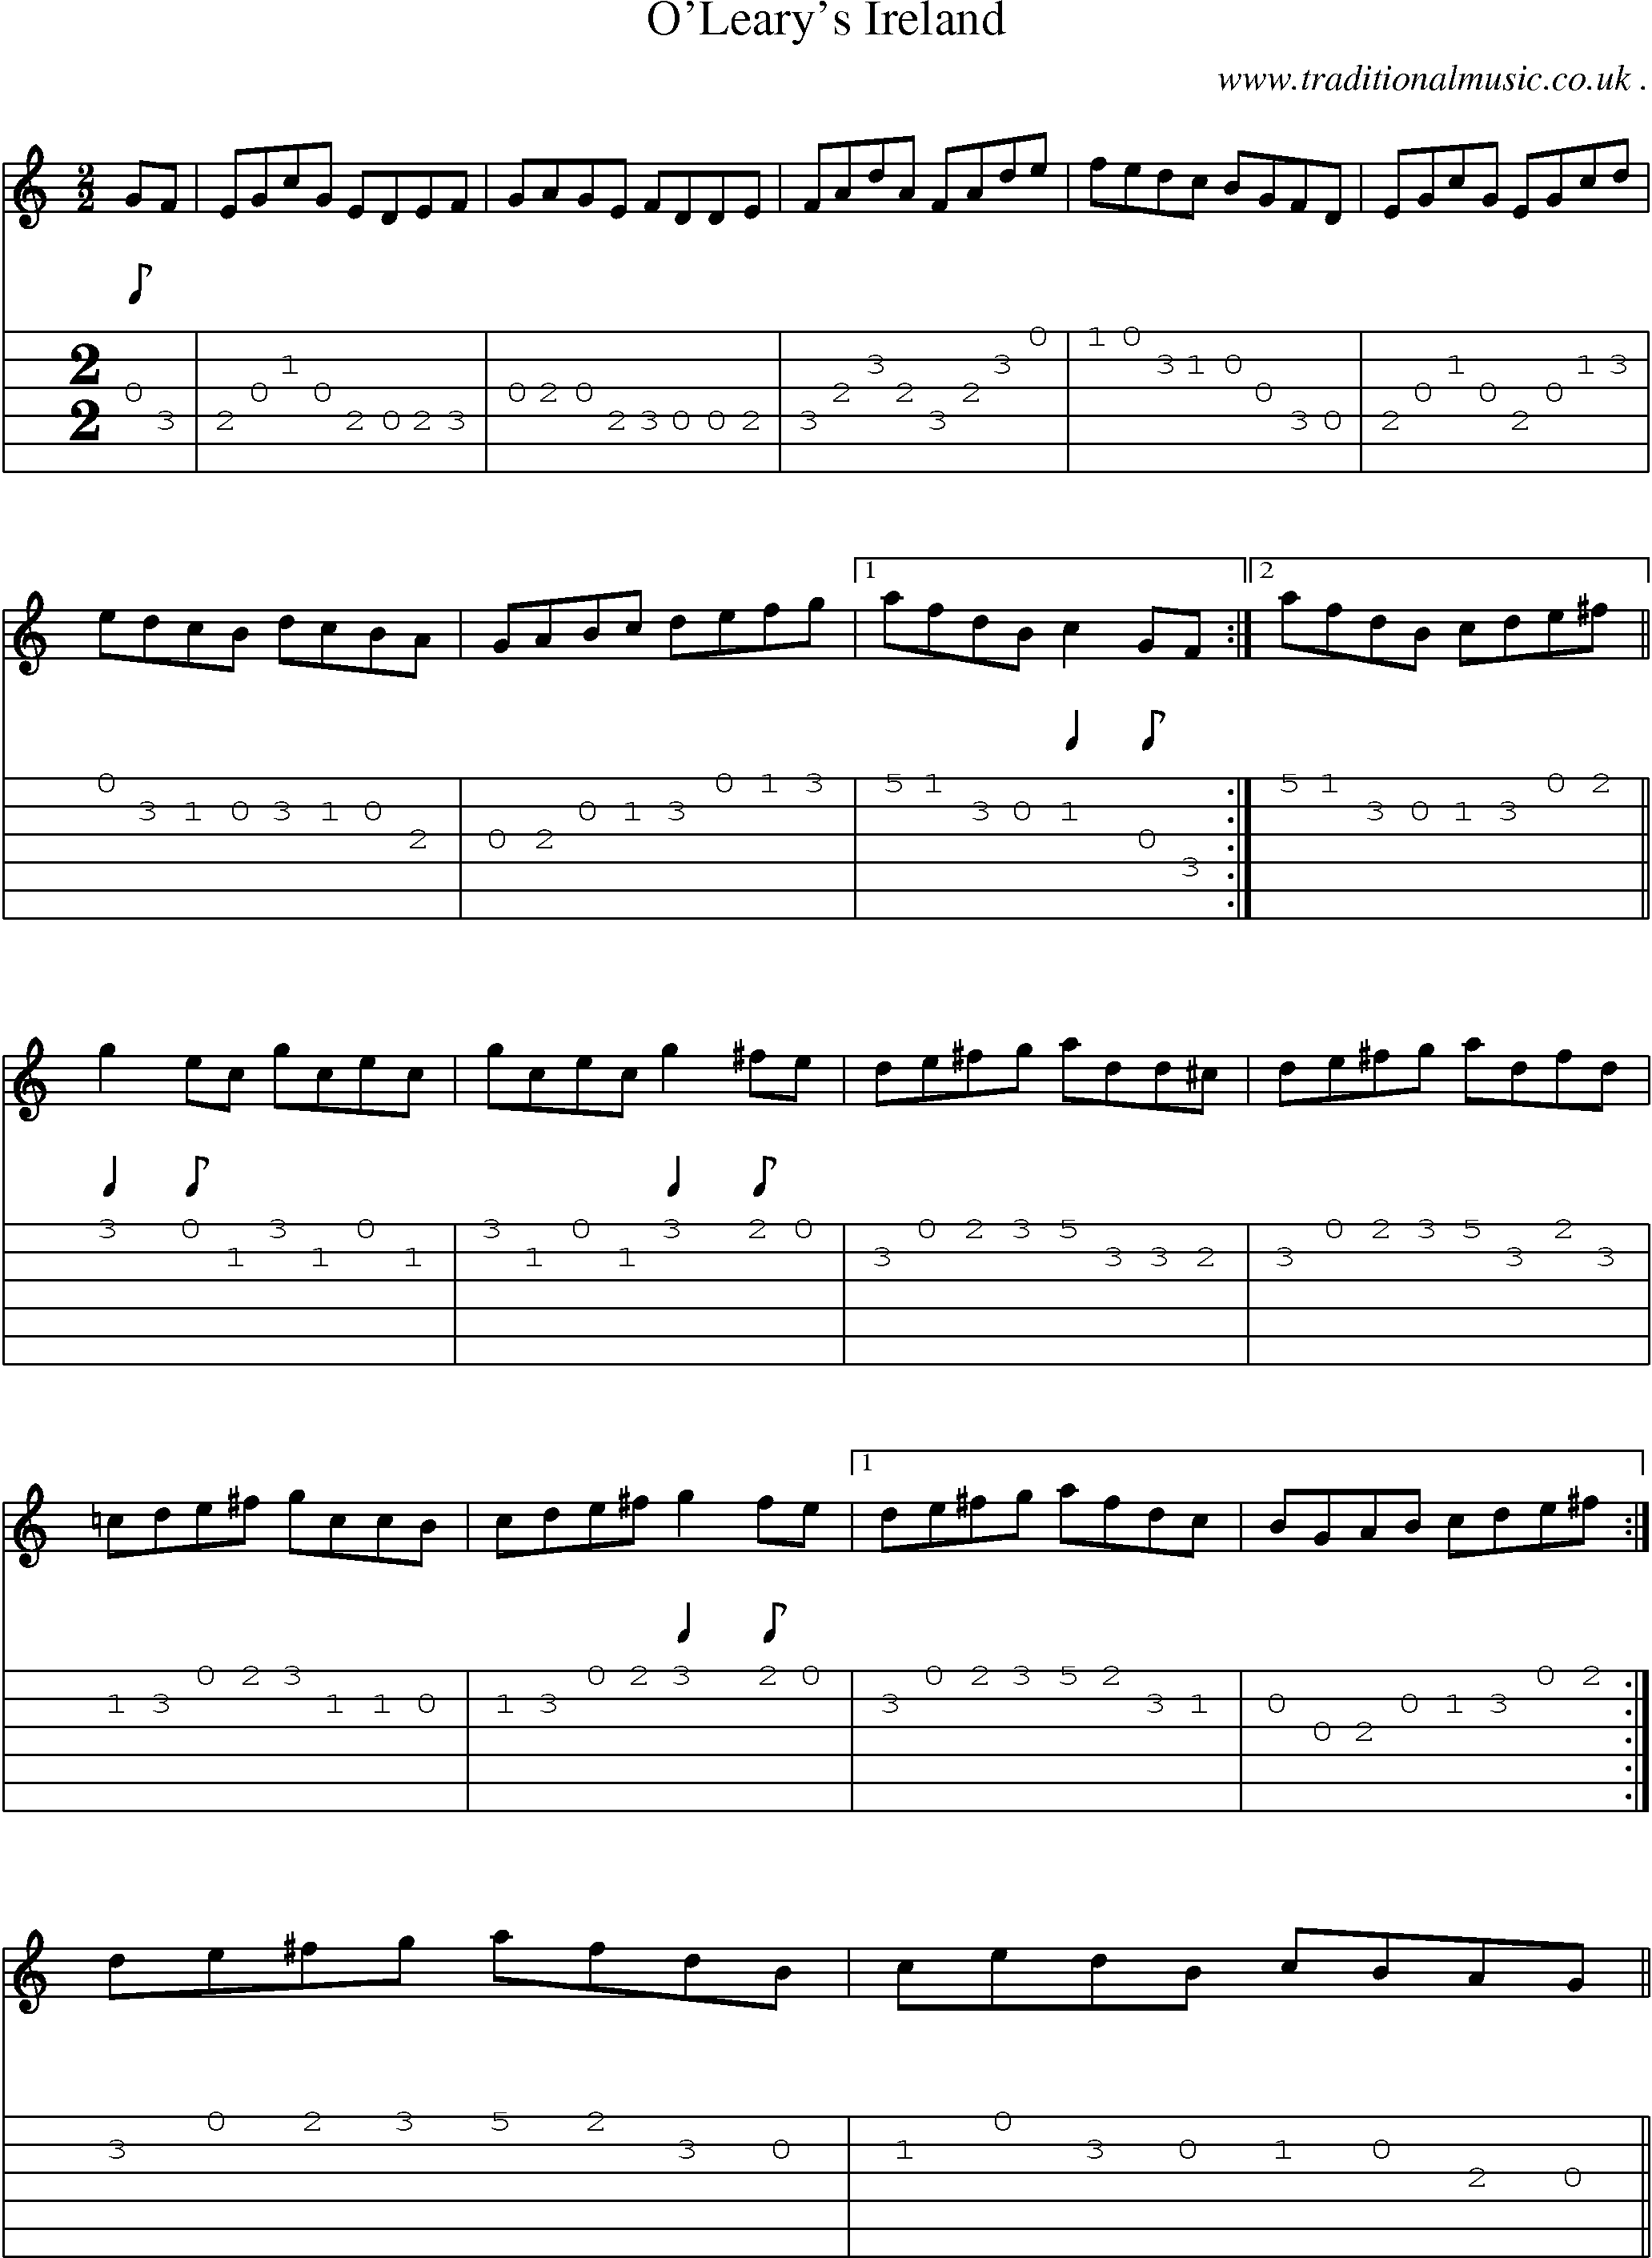 Sheet-Music and Guitar Tabs for Olearys Ireland